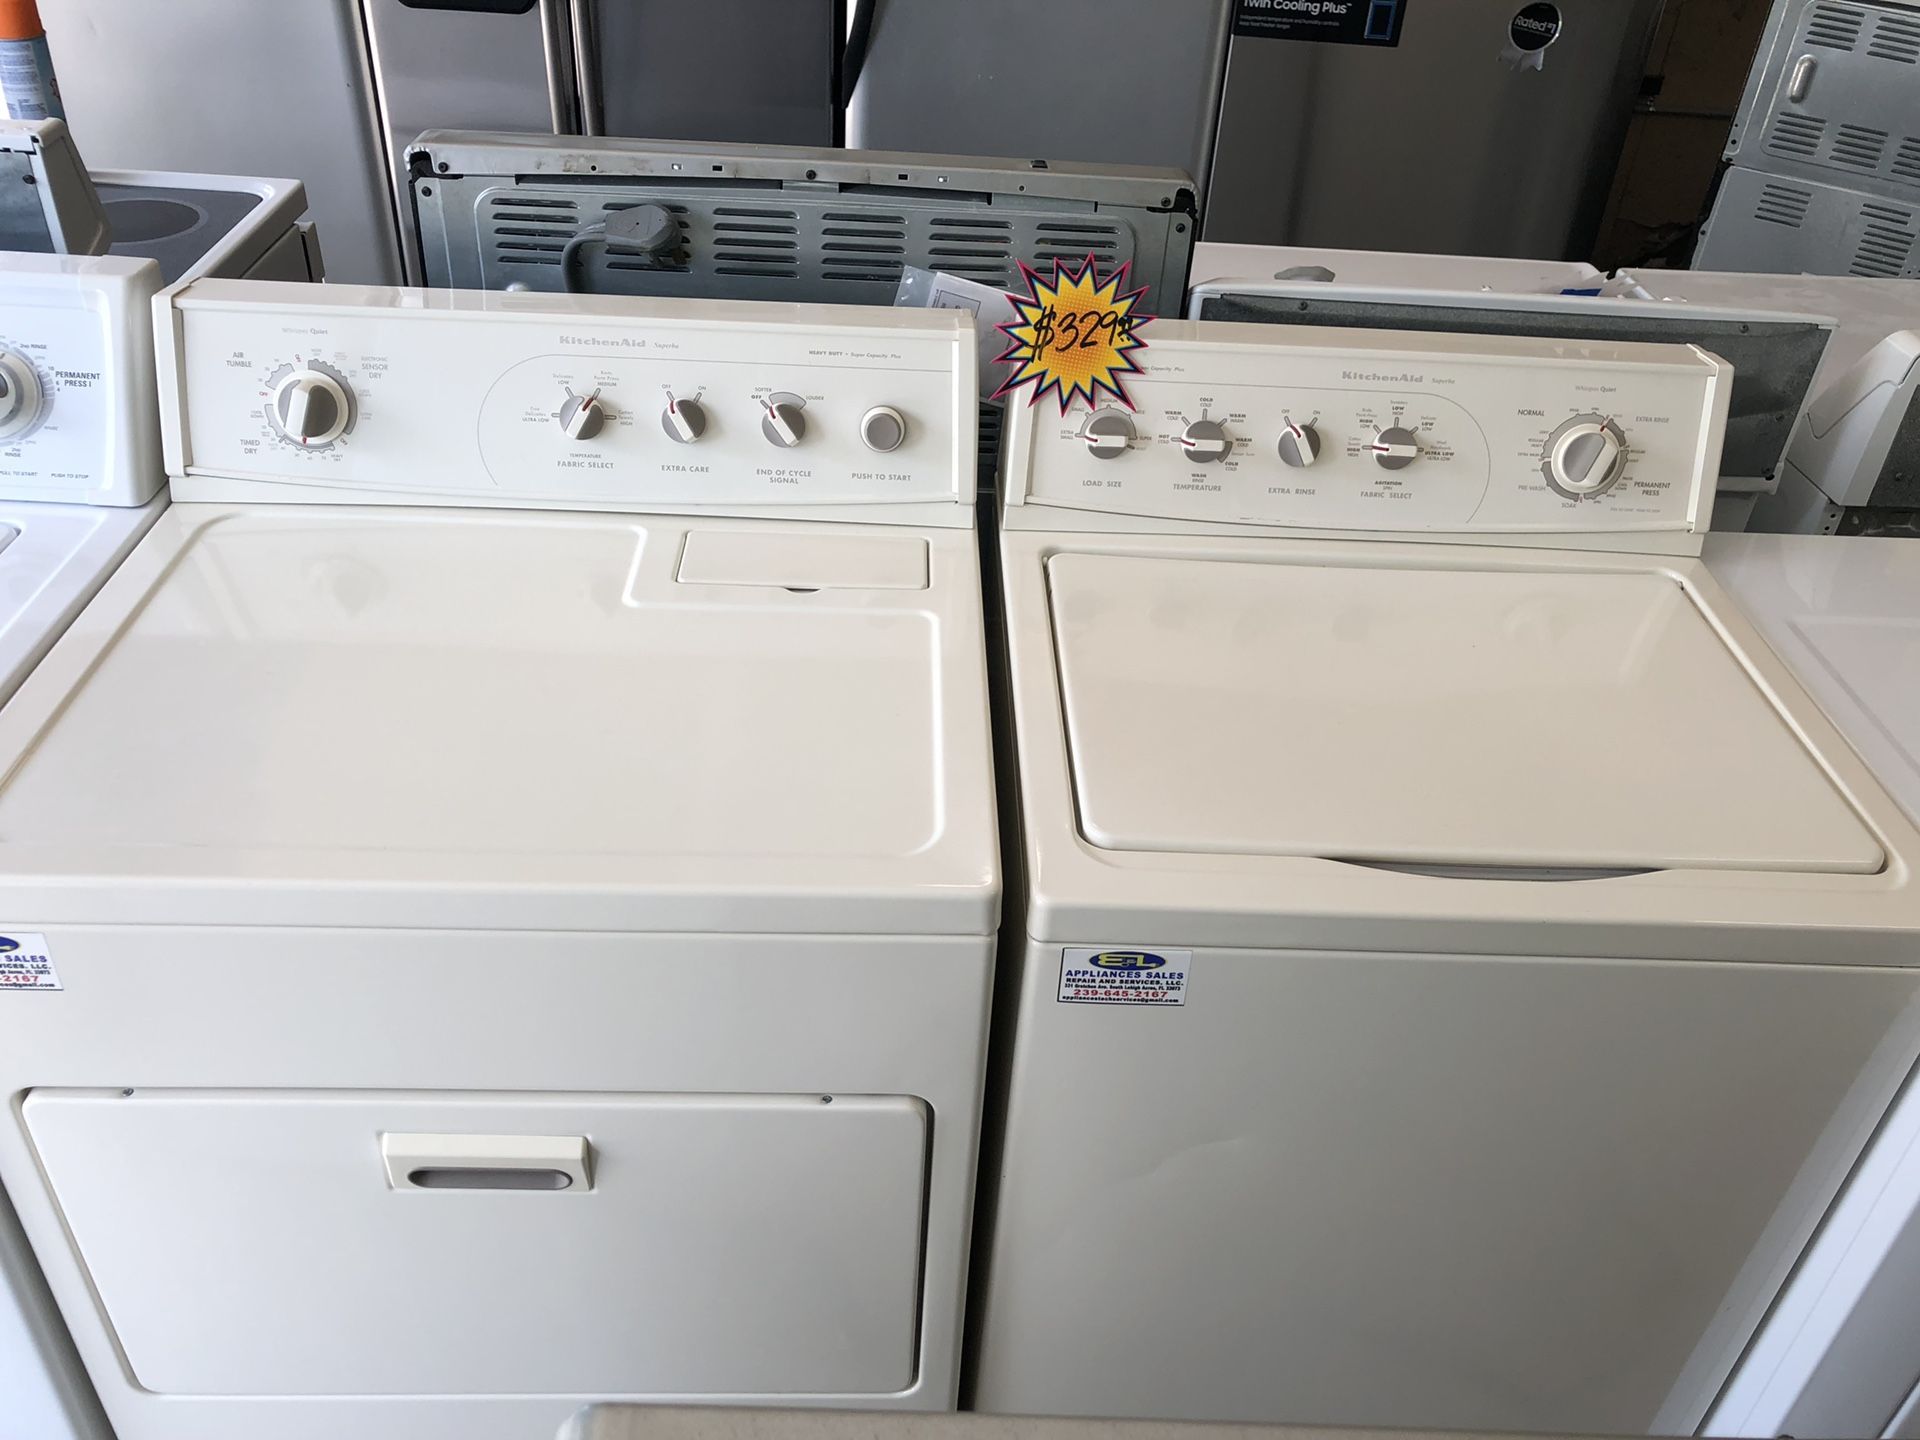 An almond Kitchen Aide set of washer and dryer